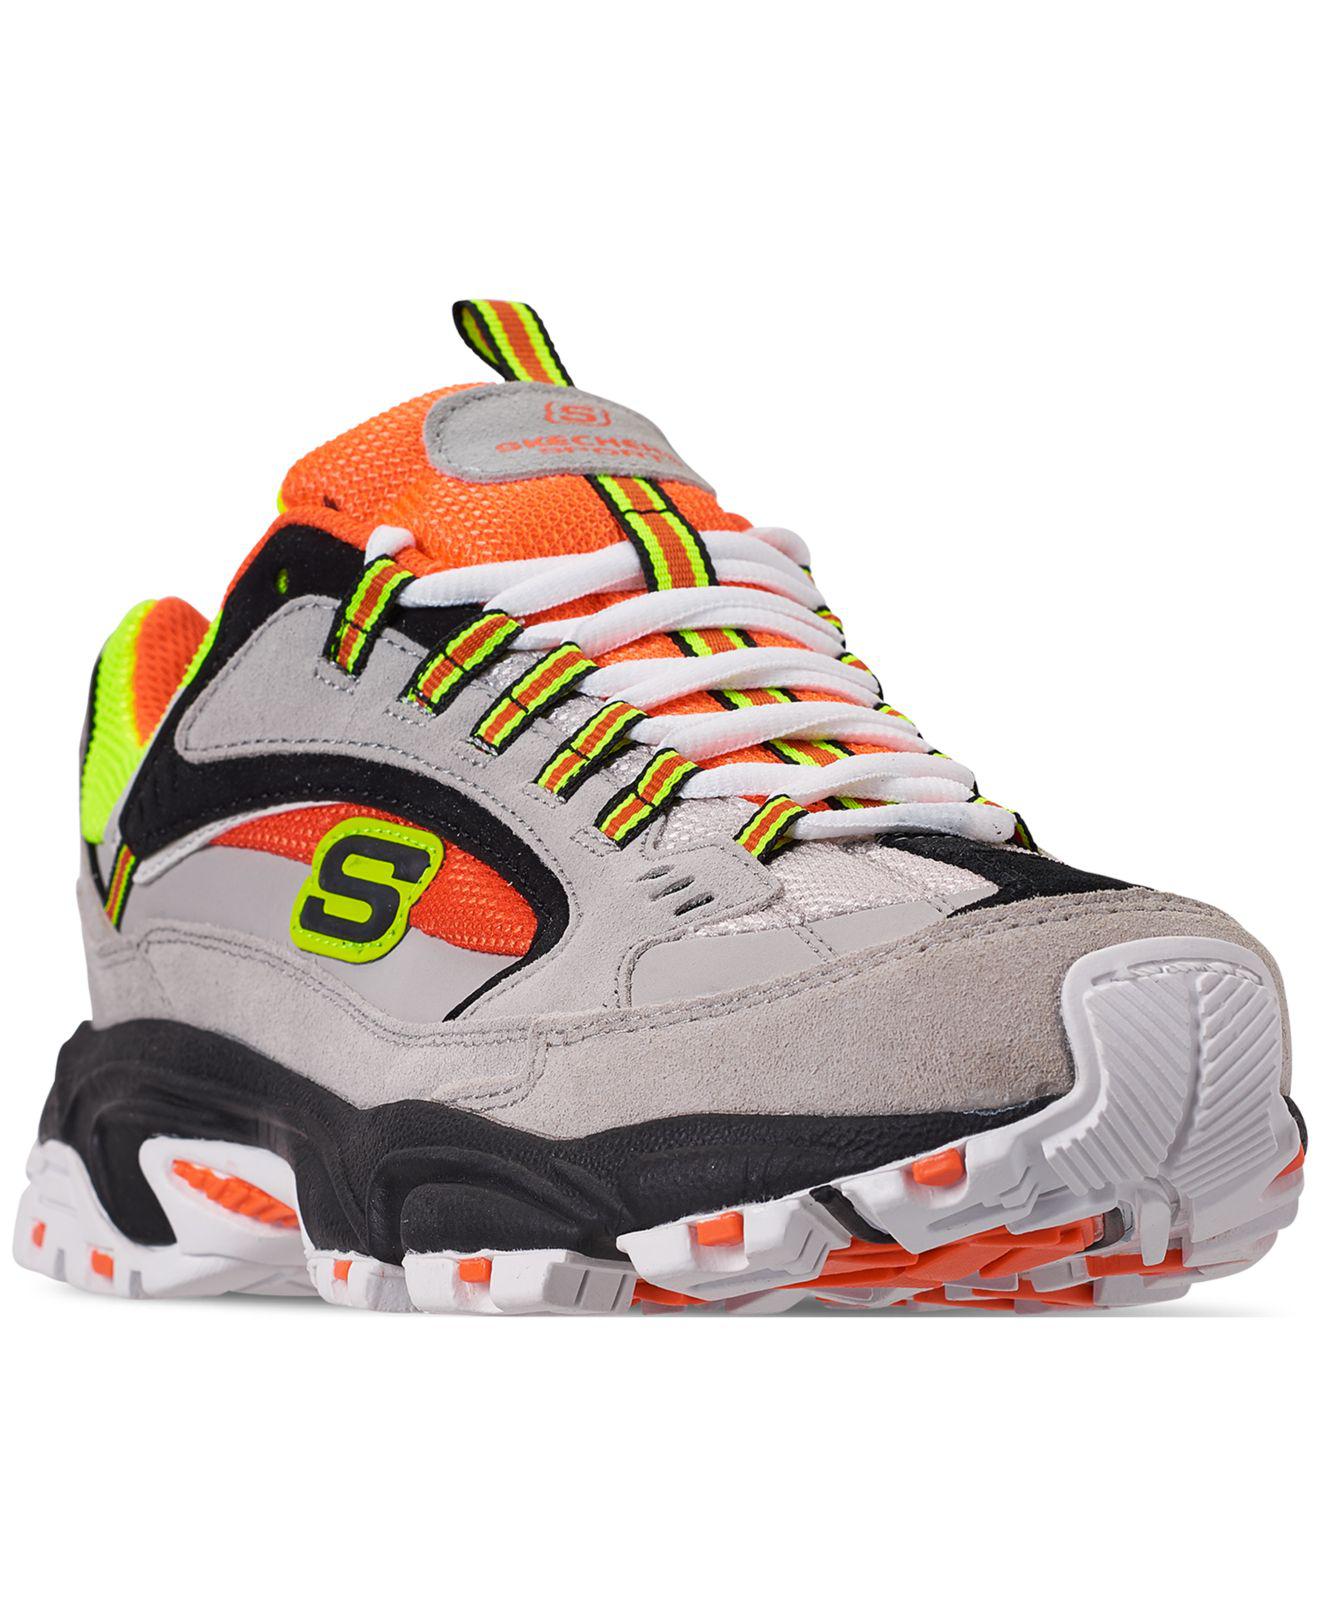 Skechers Leather Stamina Cutback Trainers in Grey/Orange/Yellow (Gray) Men - Lyst